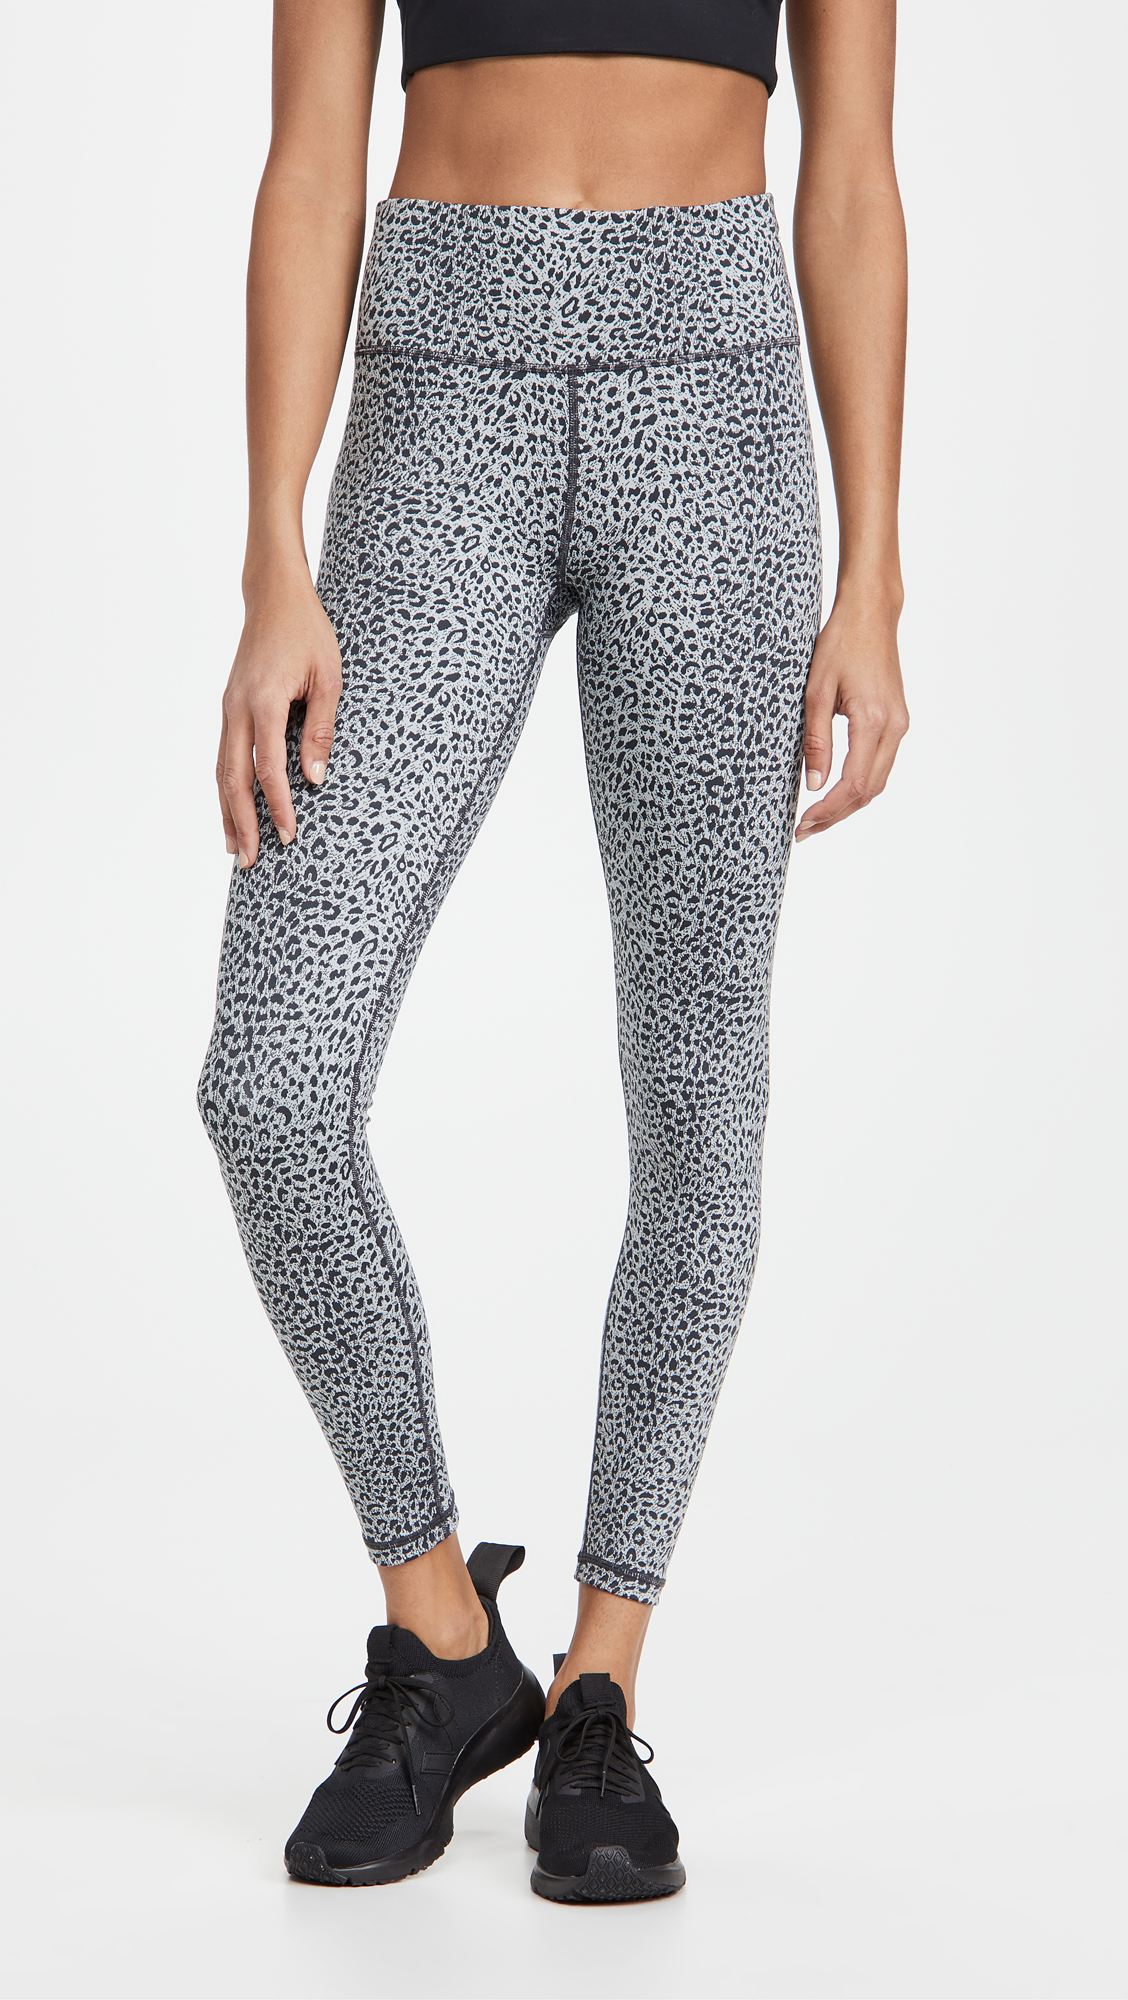 Best Printed Workout Leggings With